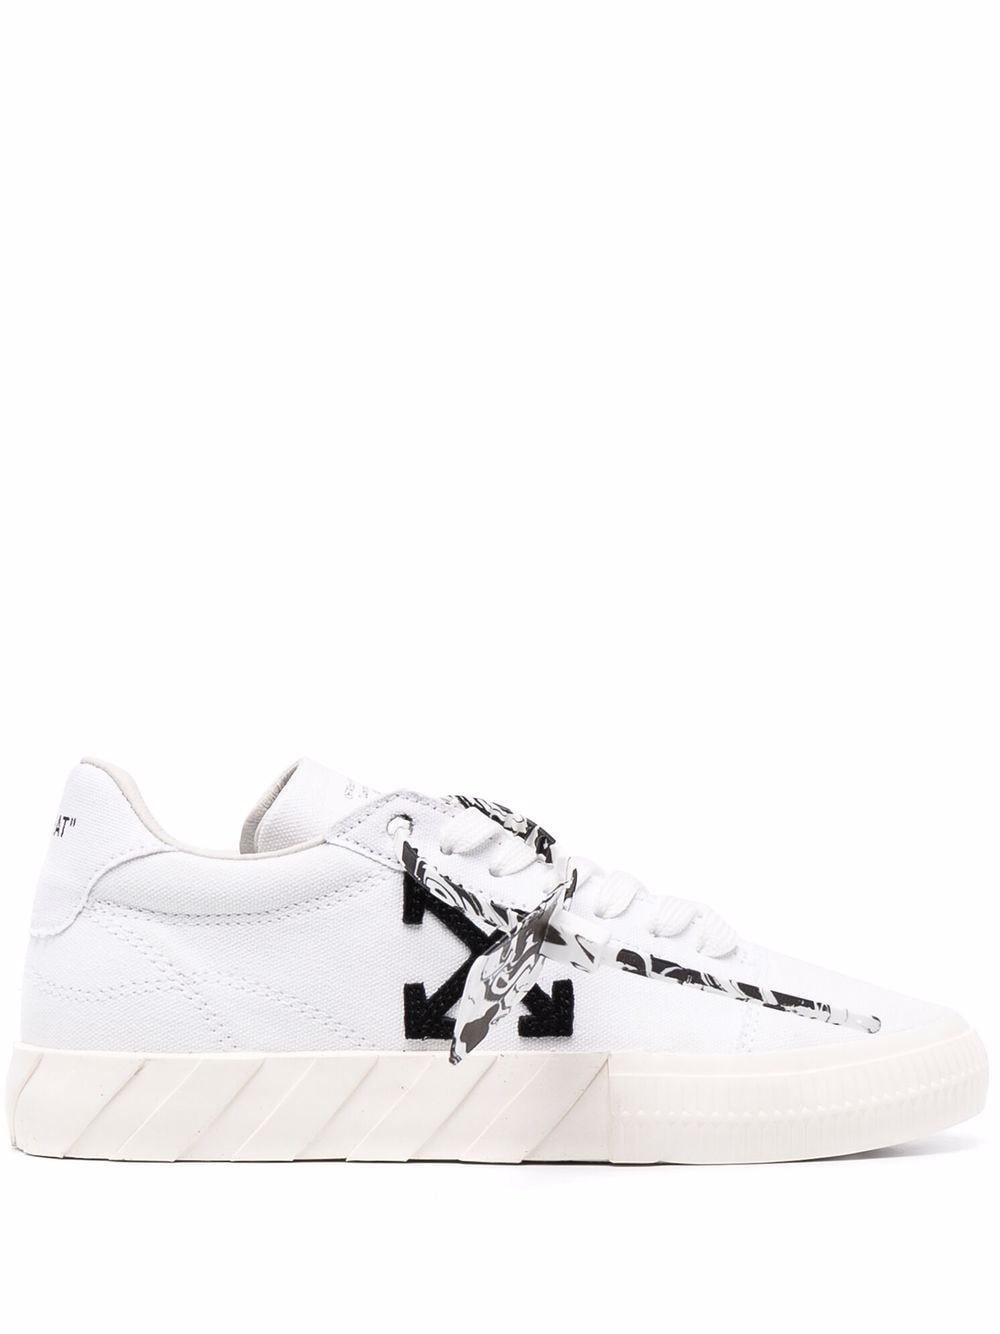 OFF-WHITE Low Vulcanized Ego Cannvas sneakers White/Black